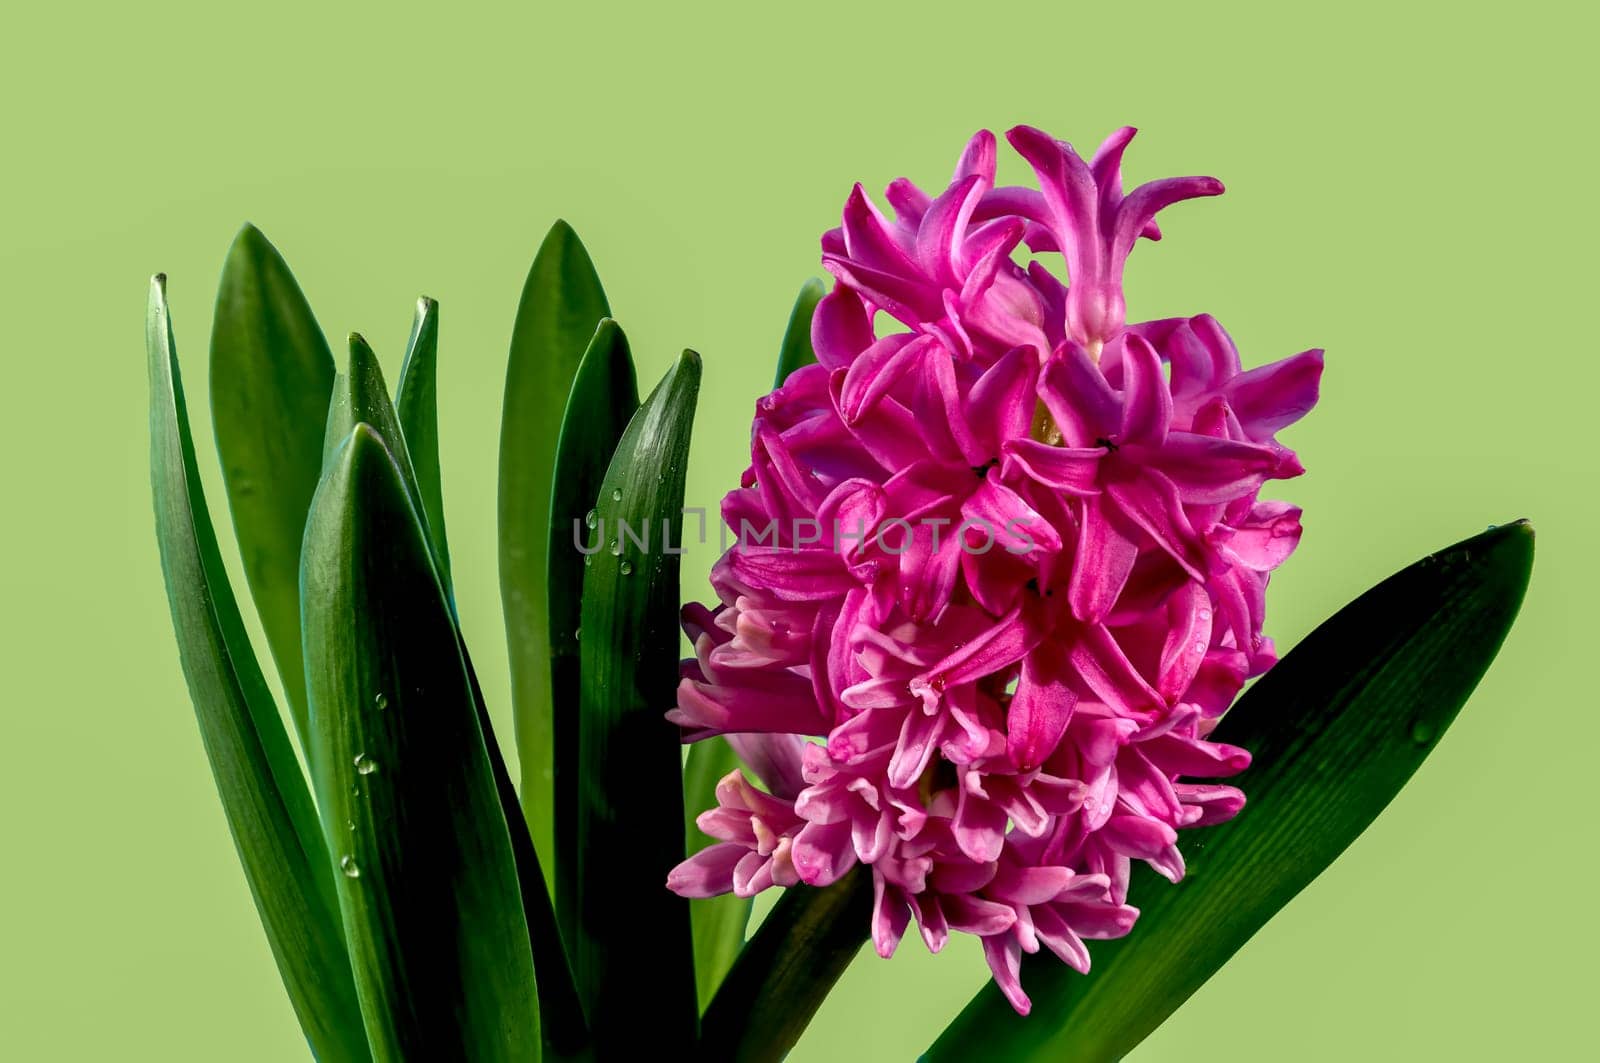 Beautiful blooming Pink Hyacinth flower on a green background. Flower head close-up.